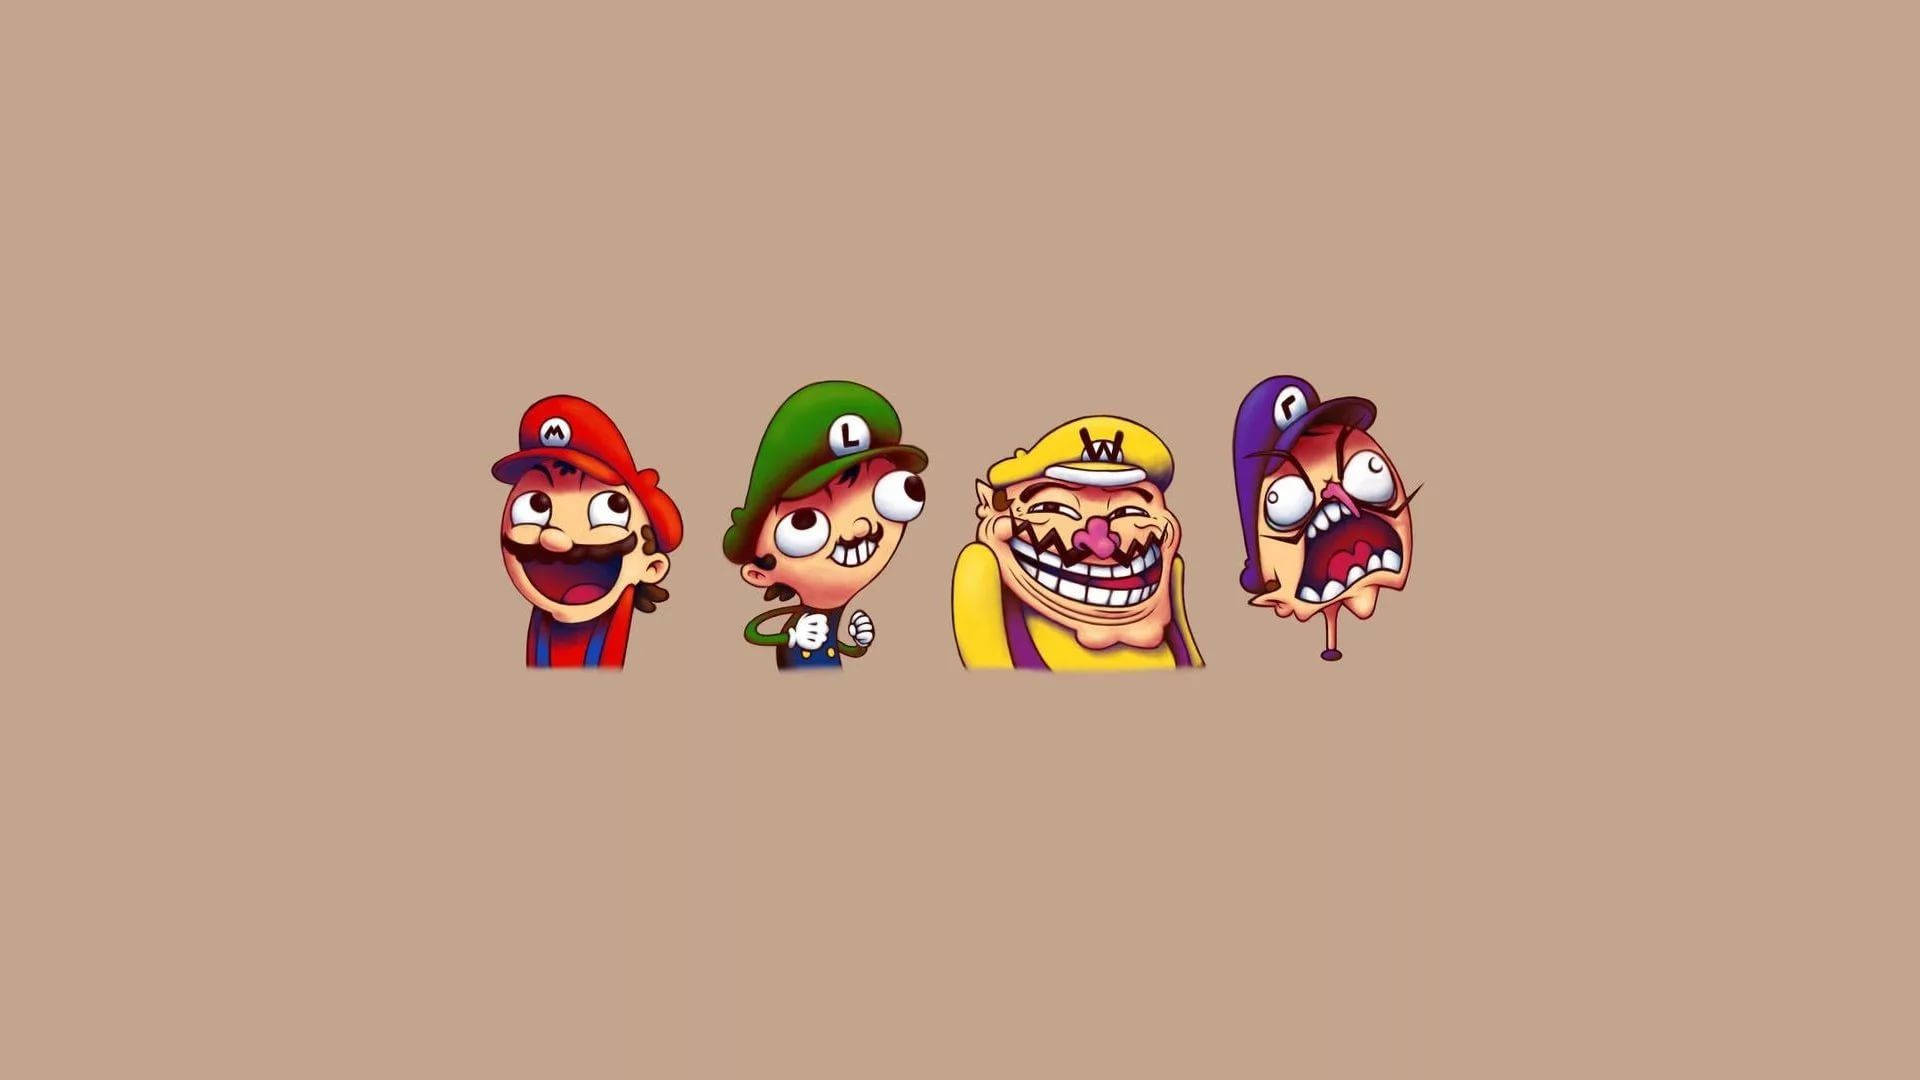 Super Mario, Luigi, Wario and Waluigi meme with different expressions and funny faces.